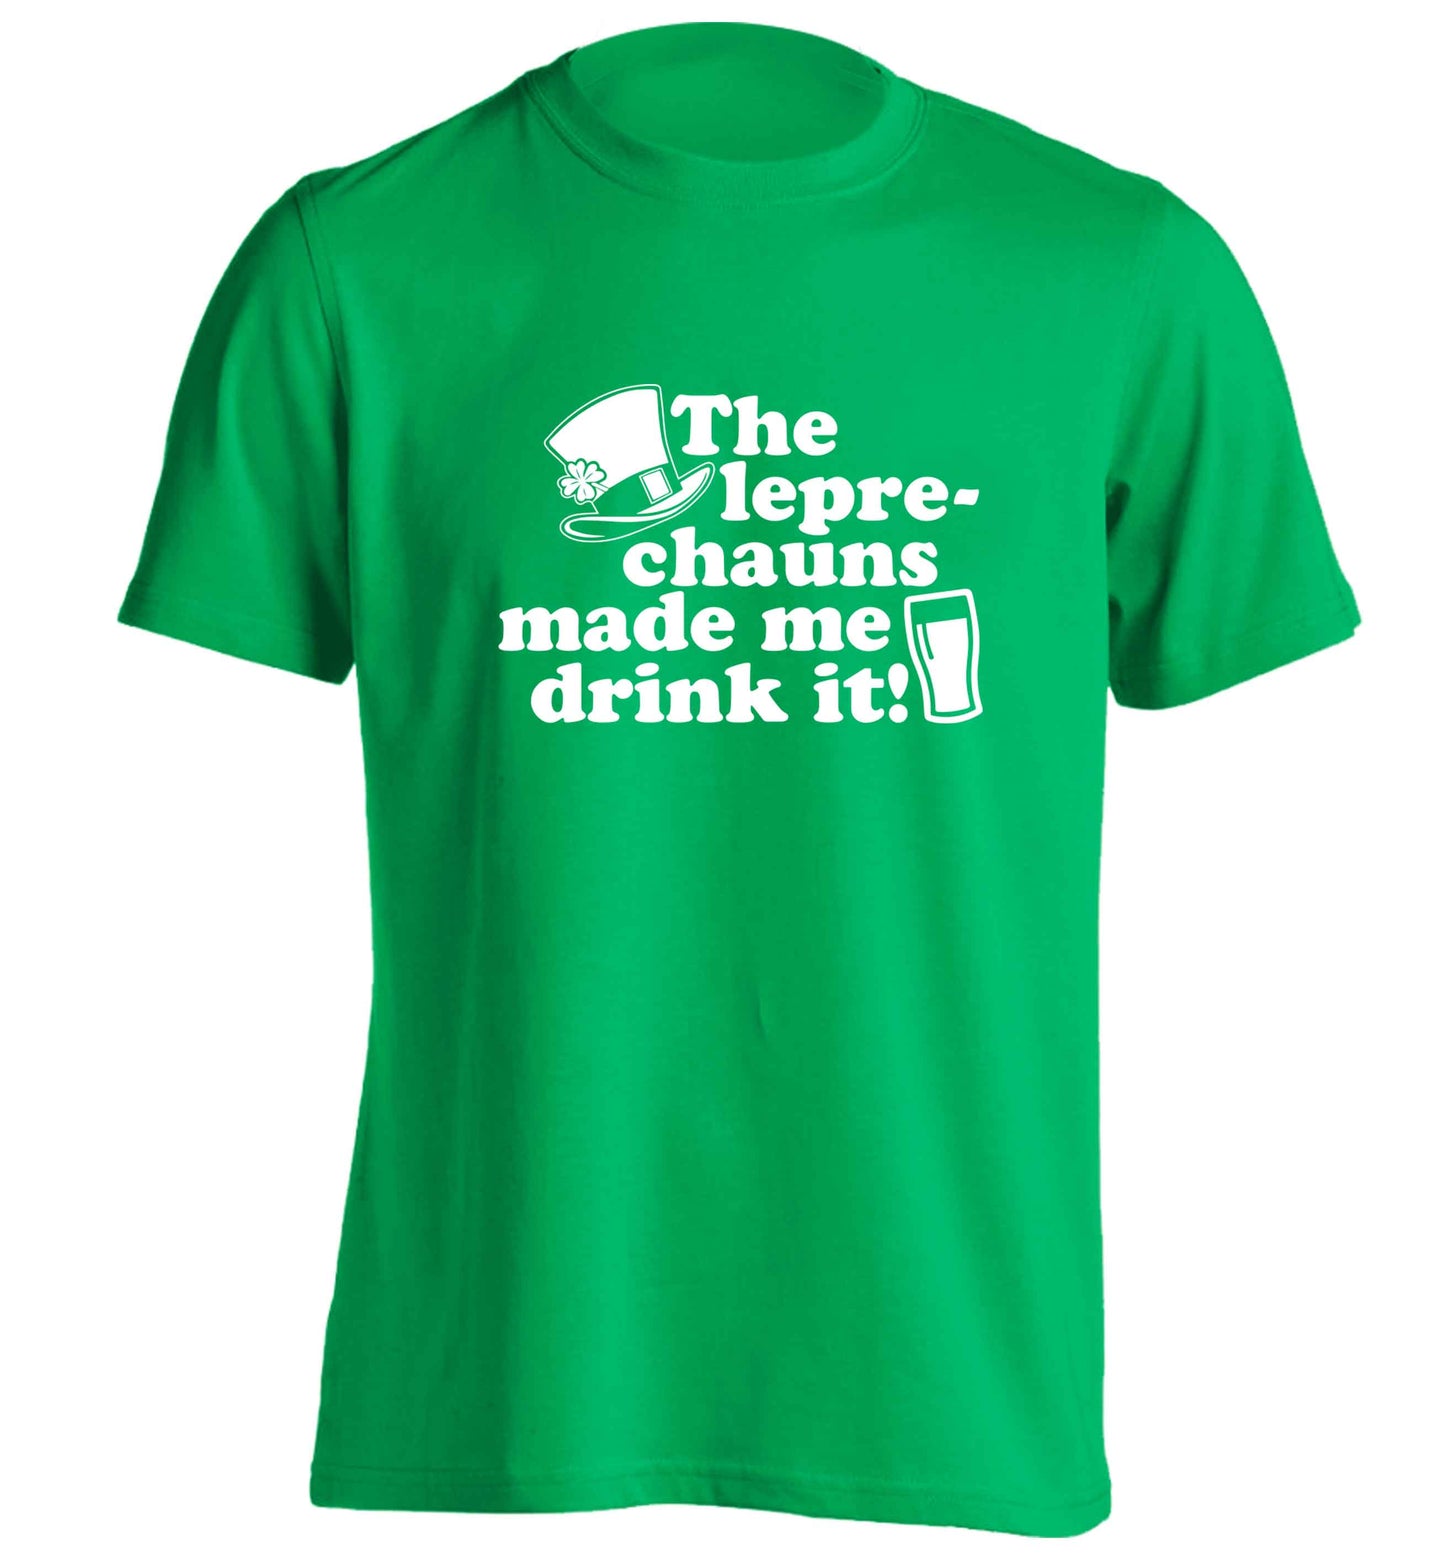 The leprechauns made me drink it adults unisex green Tshirt 2XL